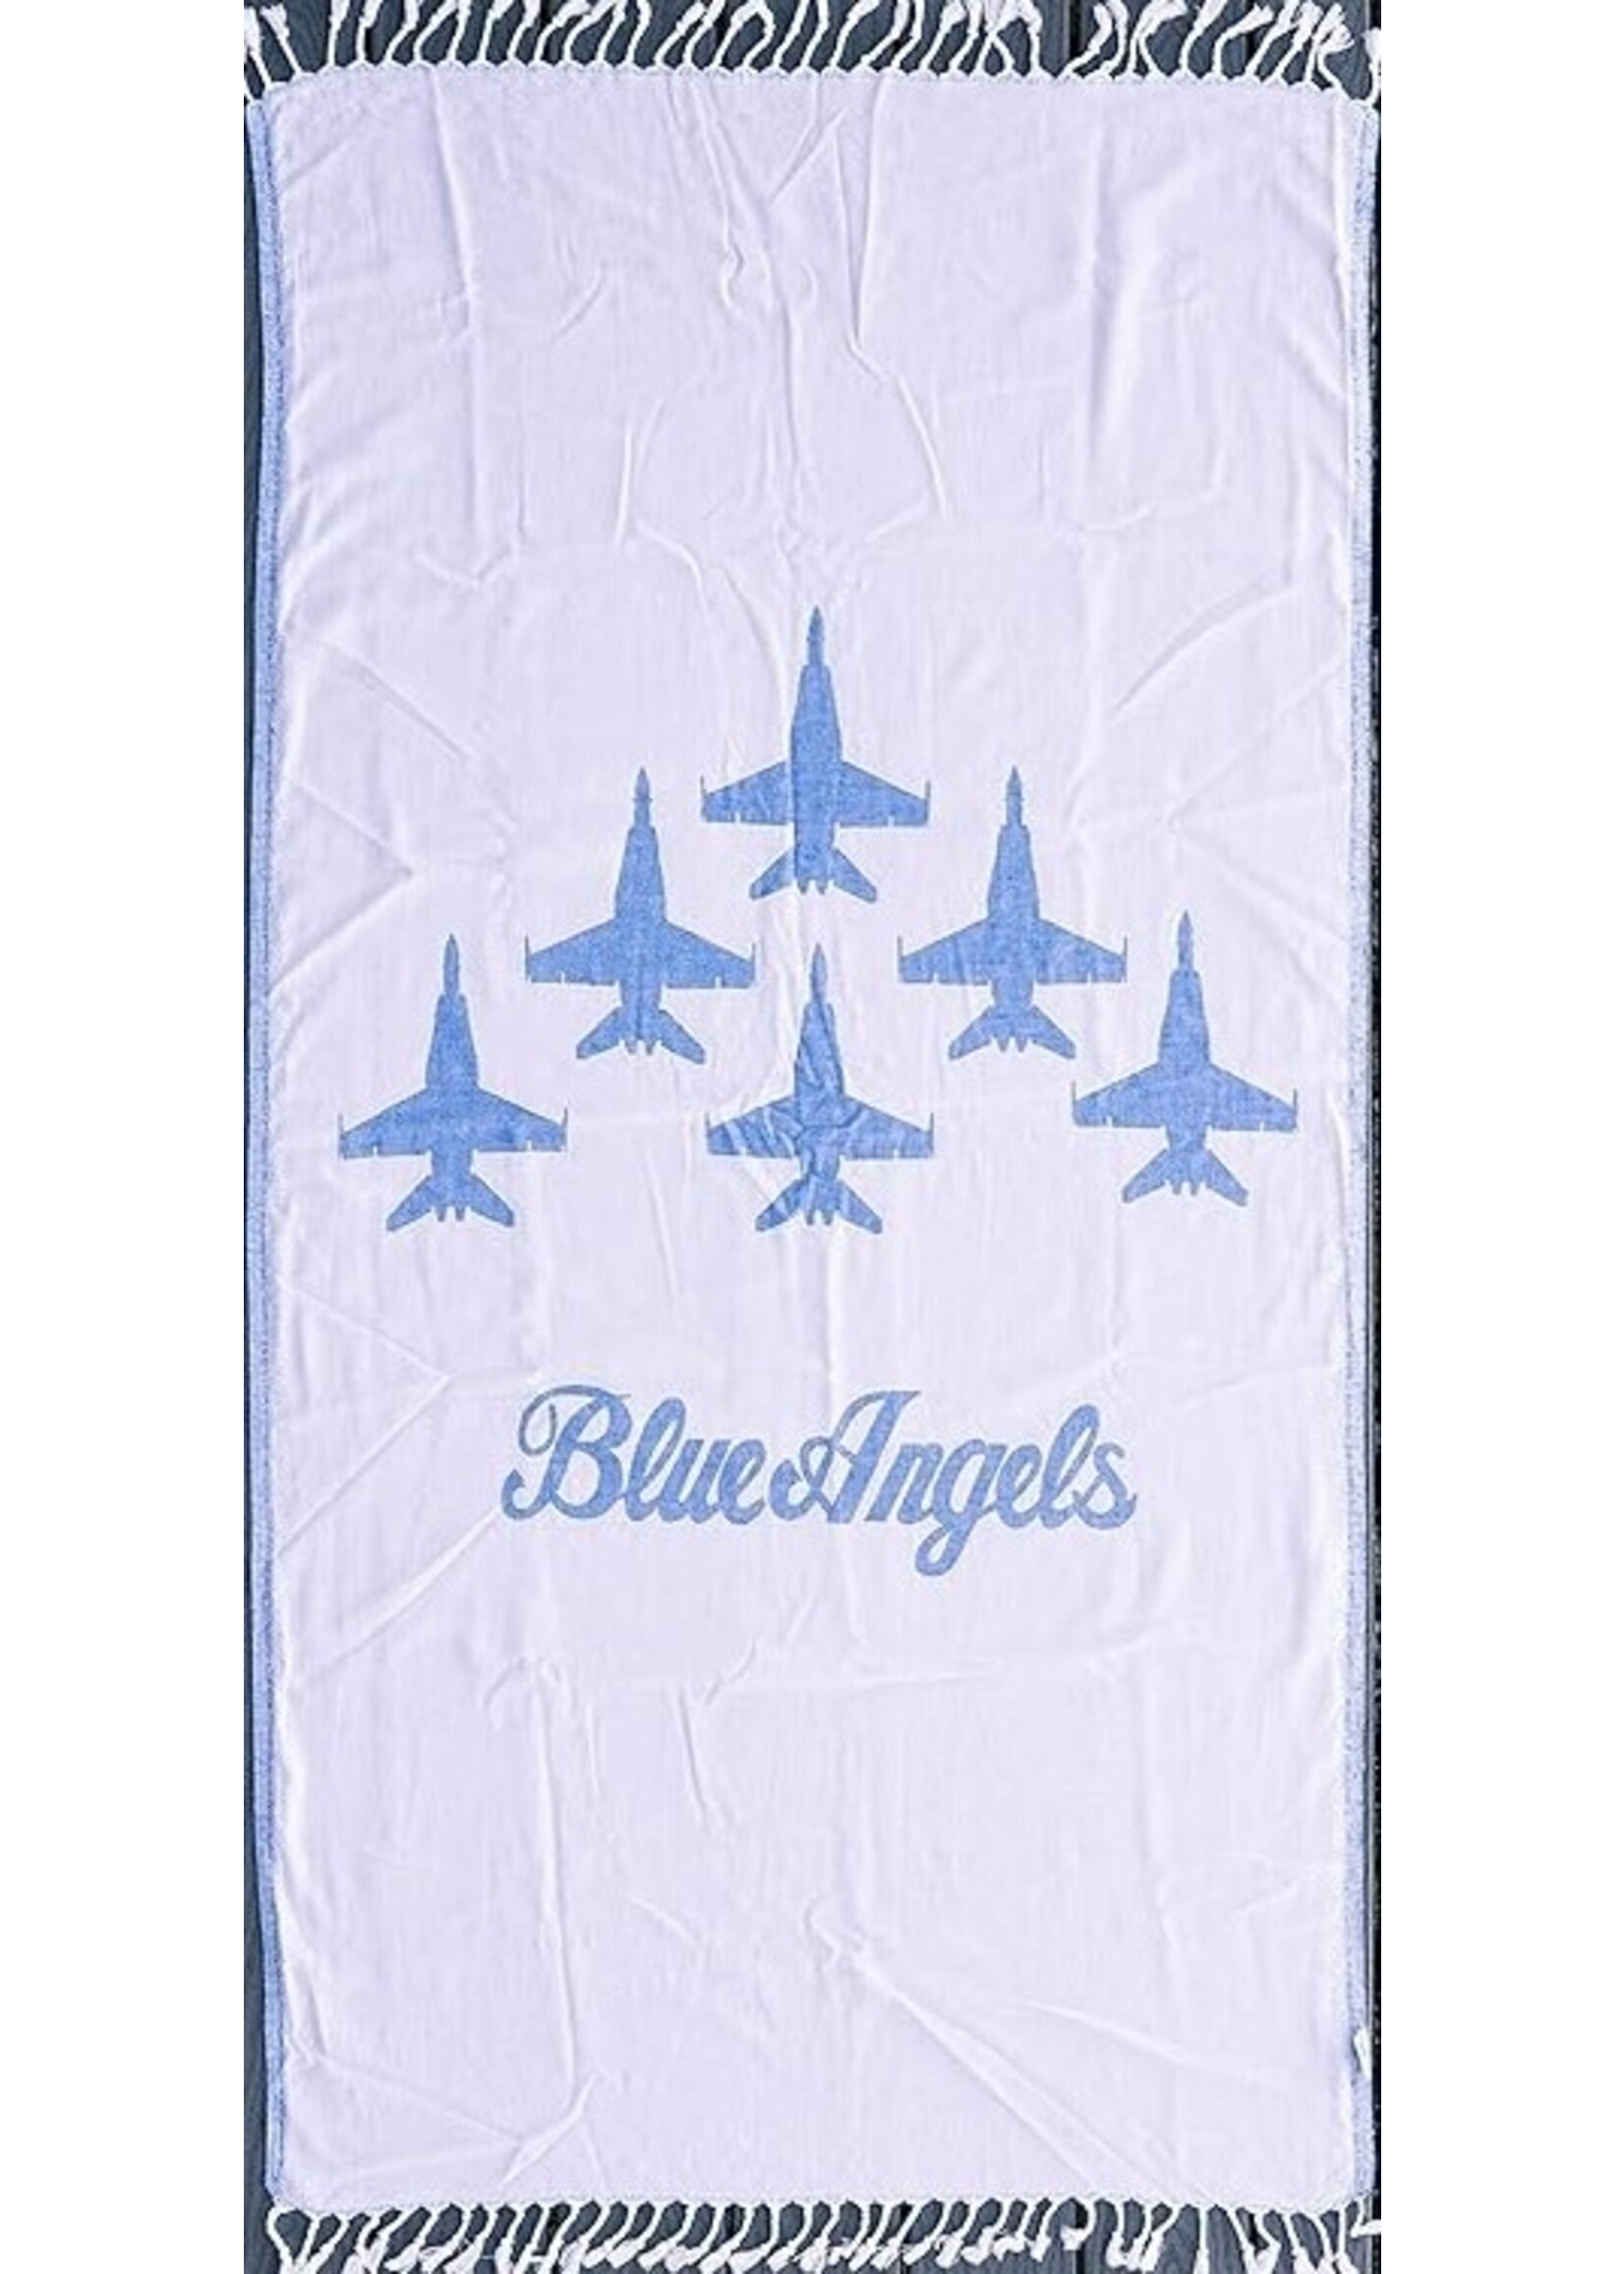 Gulf Coast Goods US NAVY Blue Angels Beach Towel  - Officially Licensed